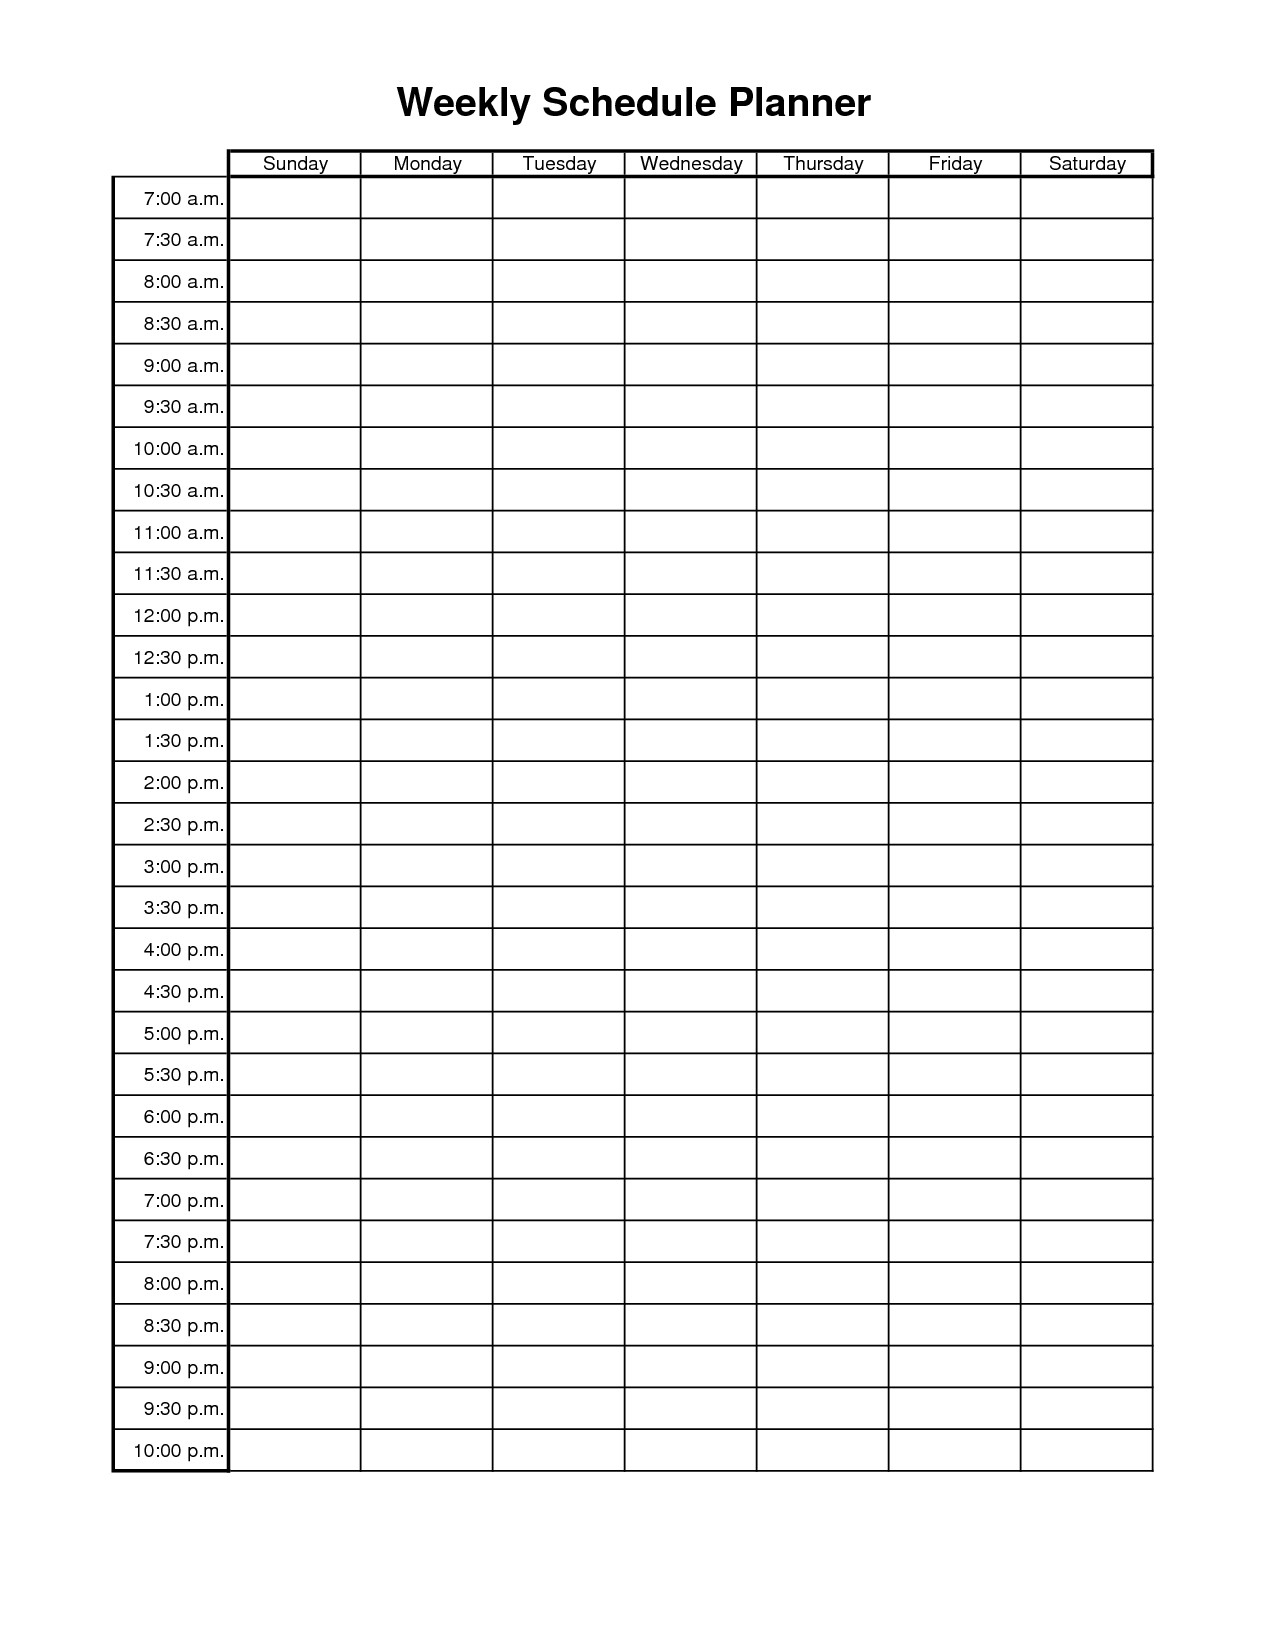 Weekly Time Schedule Template Ftu Schedule Template Found Free On the I Do Not